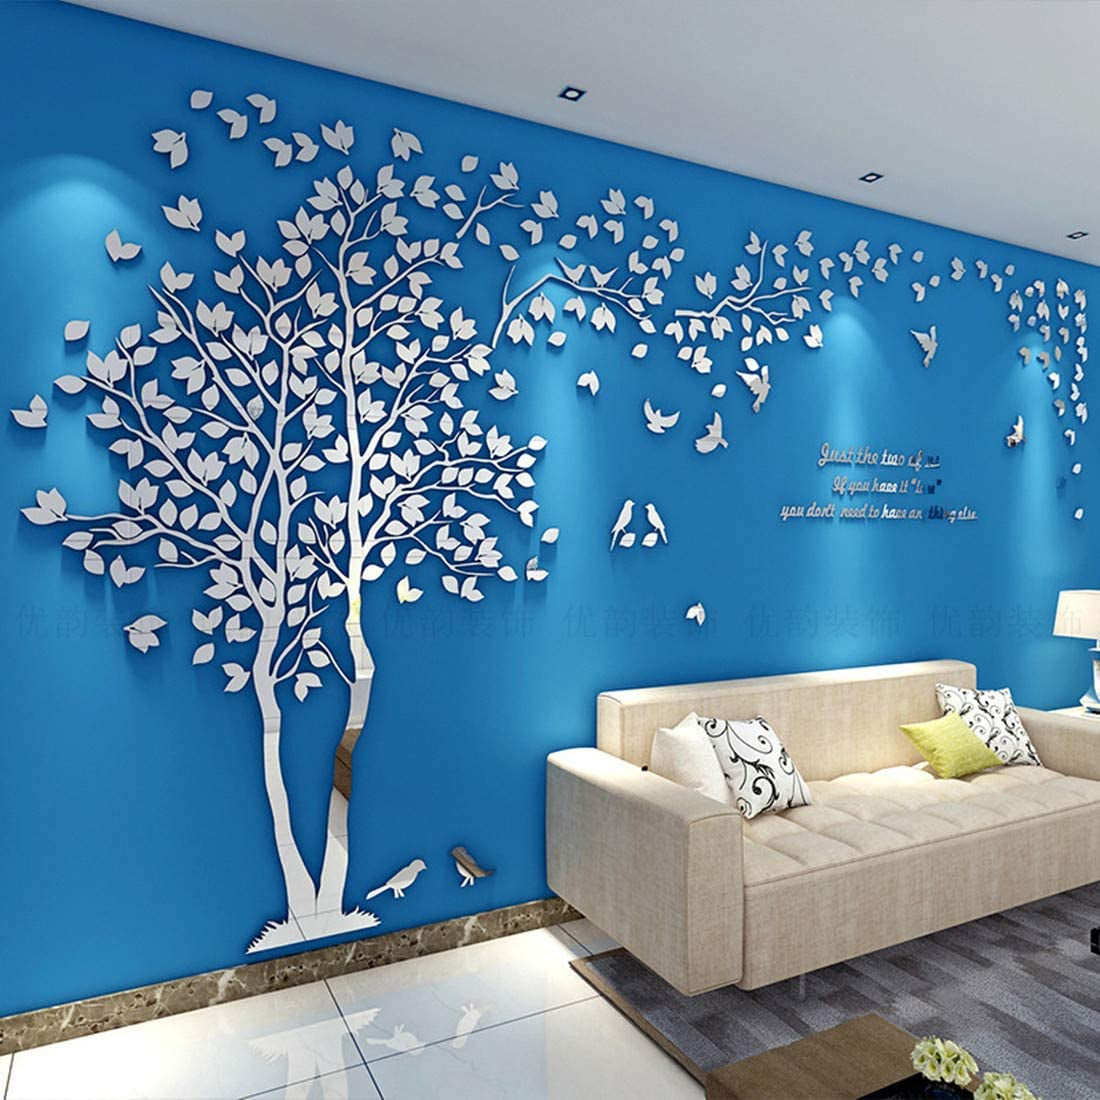 3D DIY Tree Wall Sticker Large Family Bird and Tree Wall Decal Art Mural Stickers Home Decor for Living Room Bedroom Nursery Kindergarten Home Decoration TV Backdrop Wall